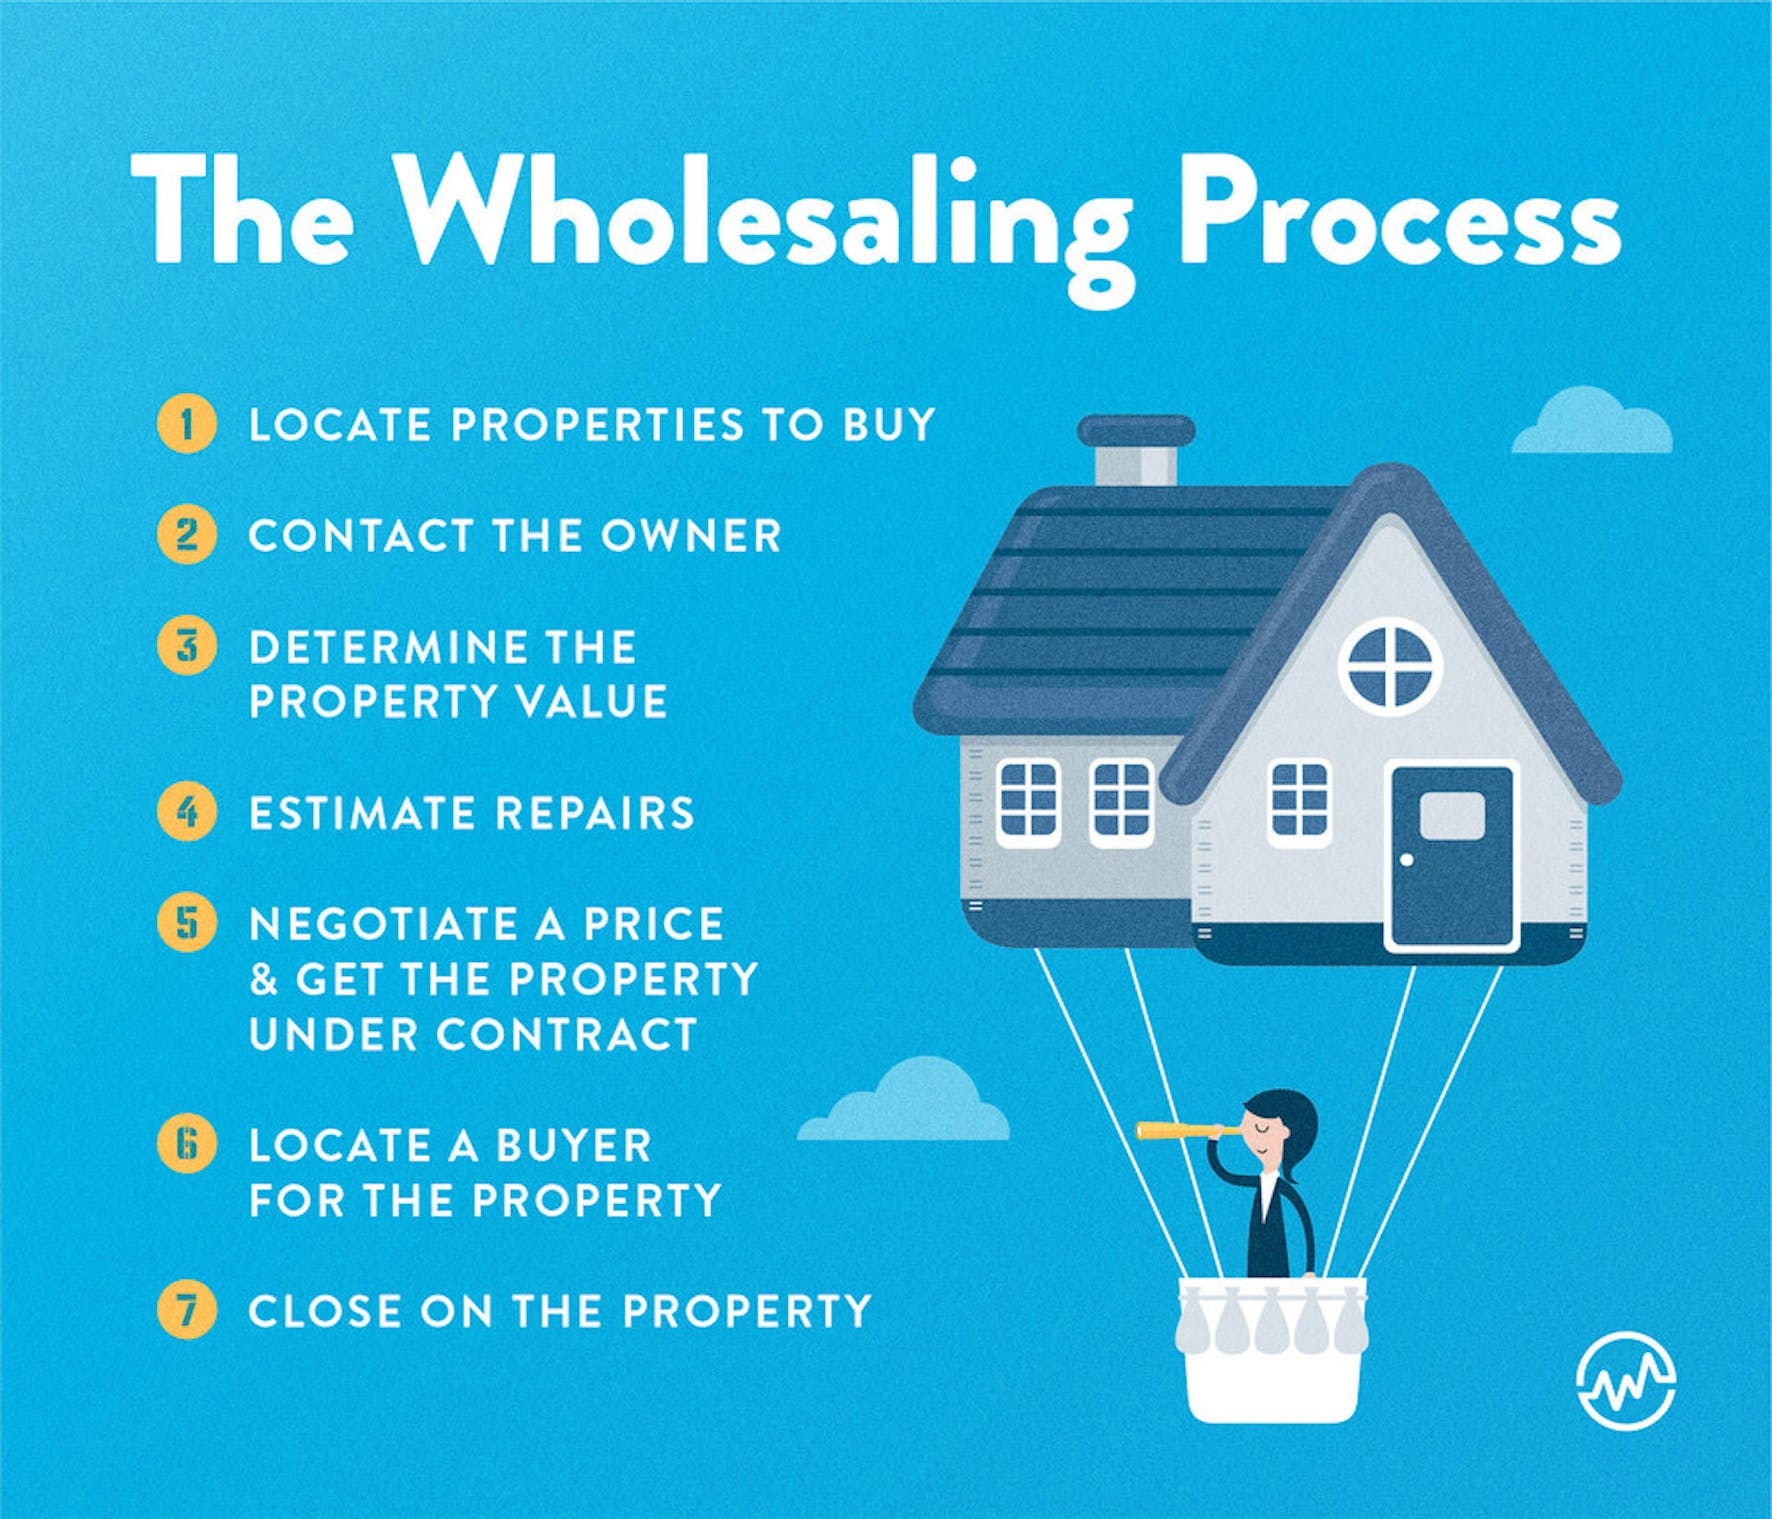 How to become a wholesaler in real estate